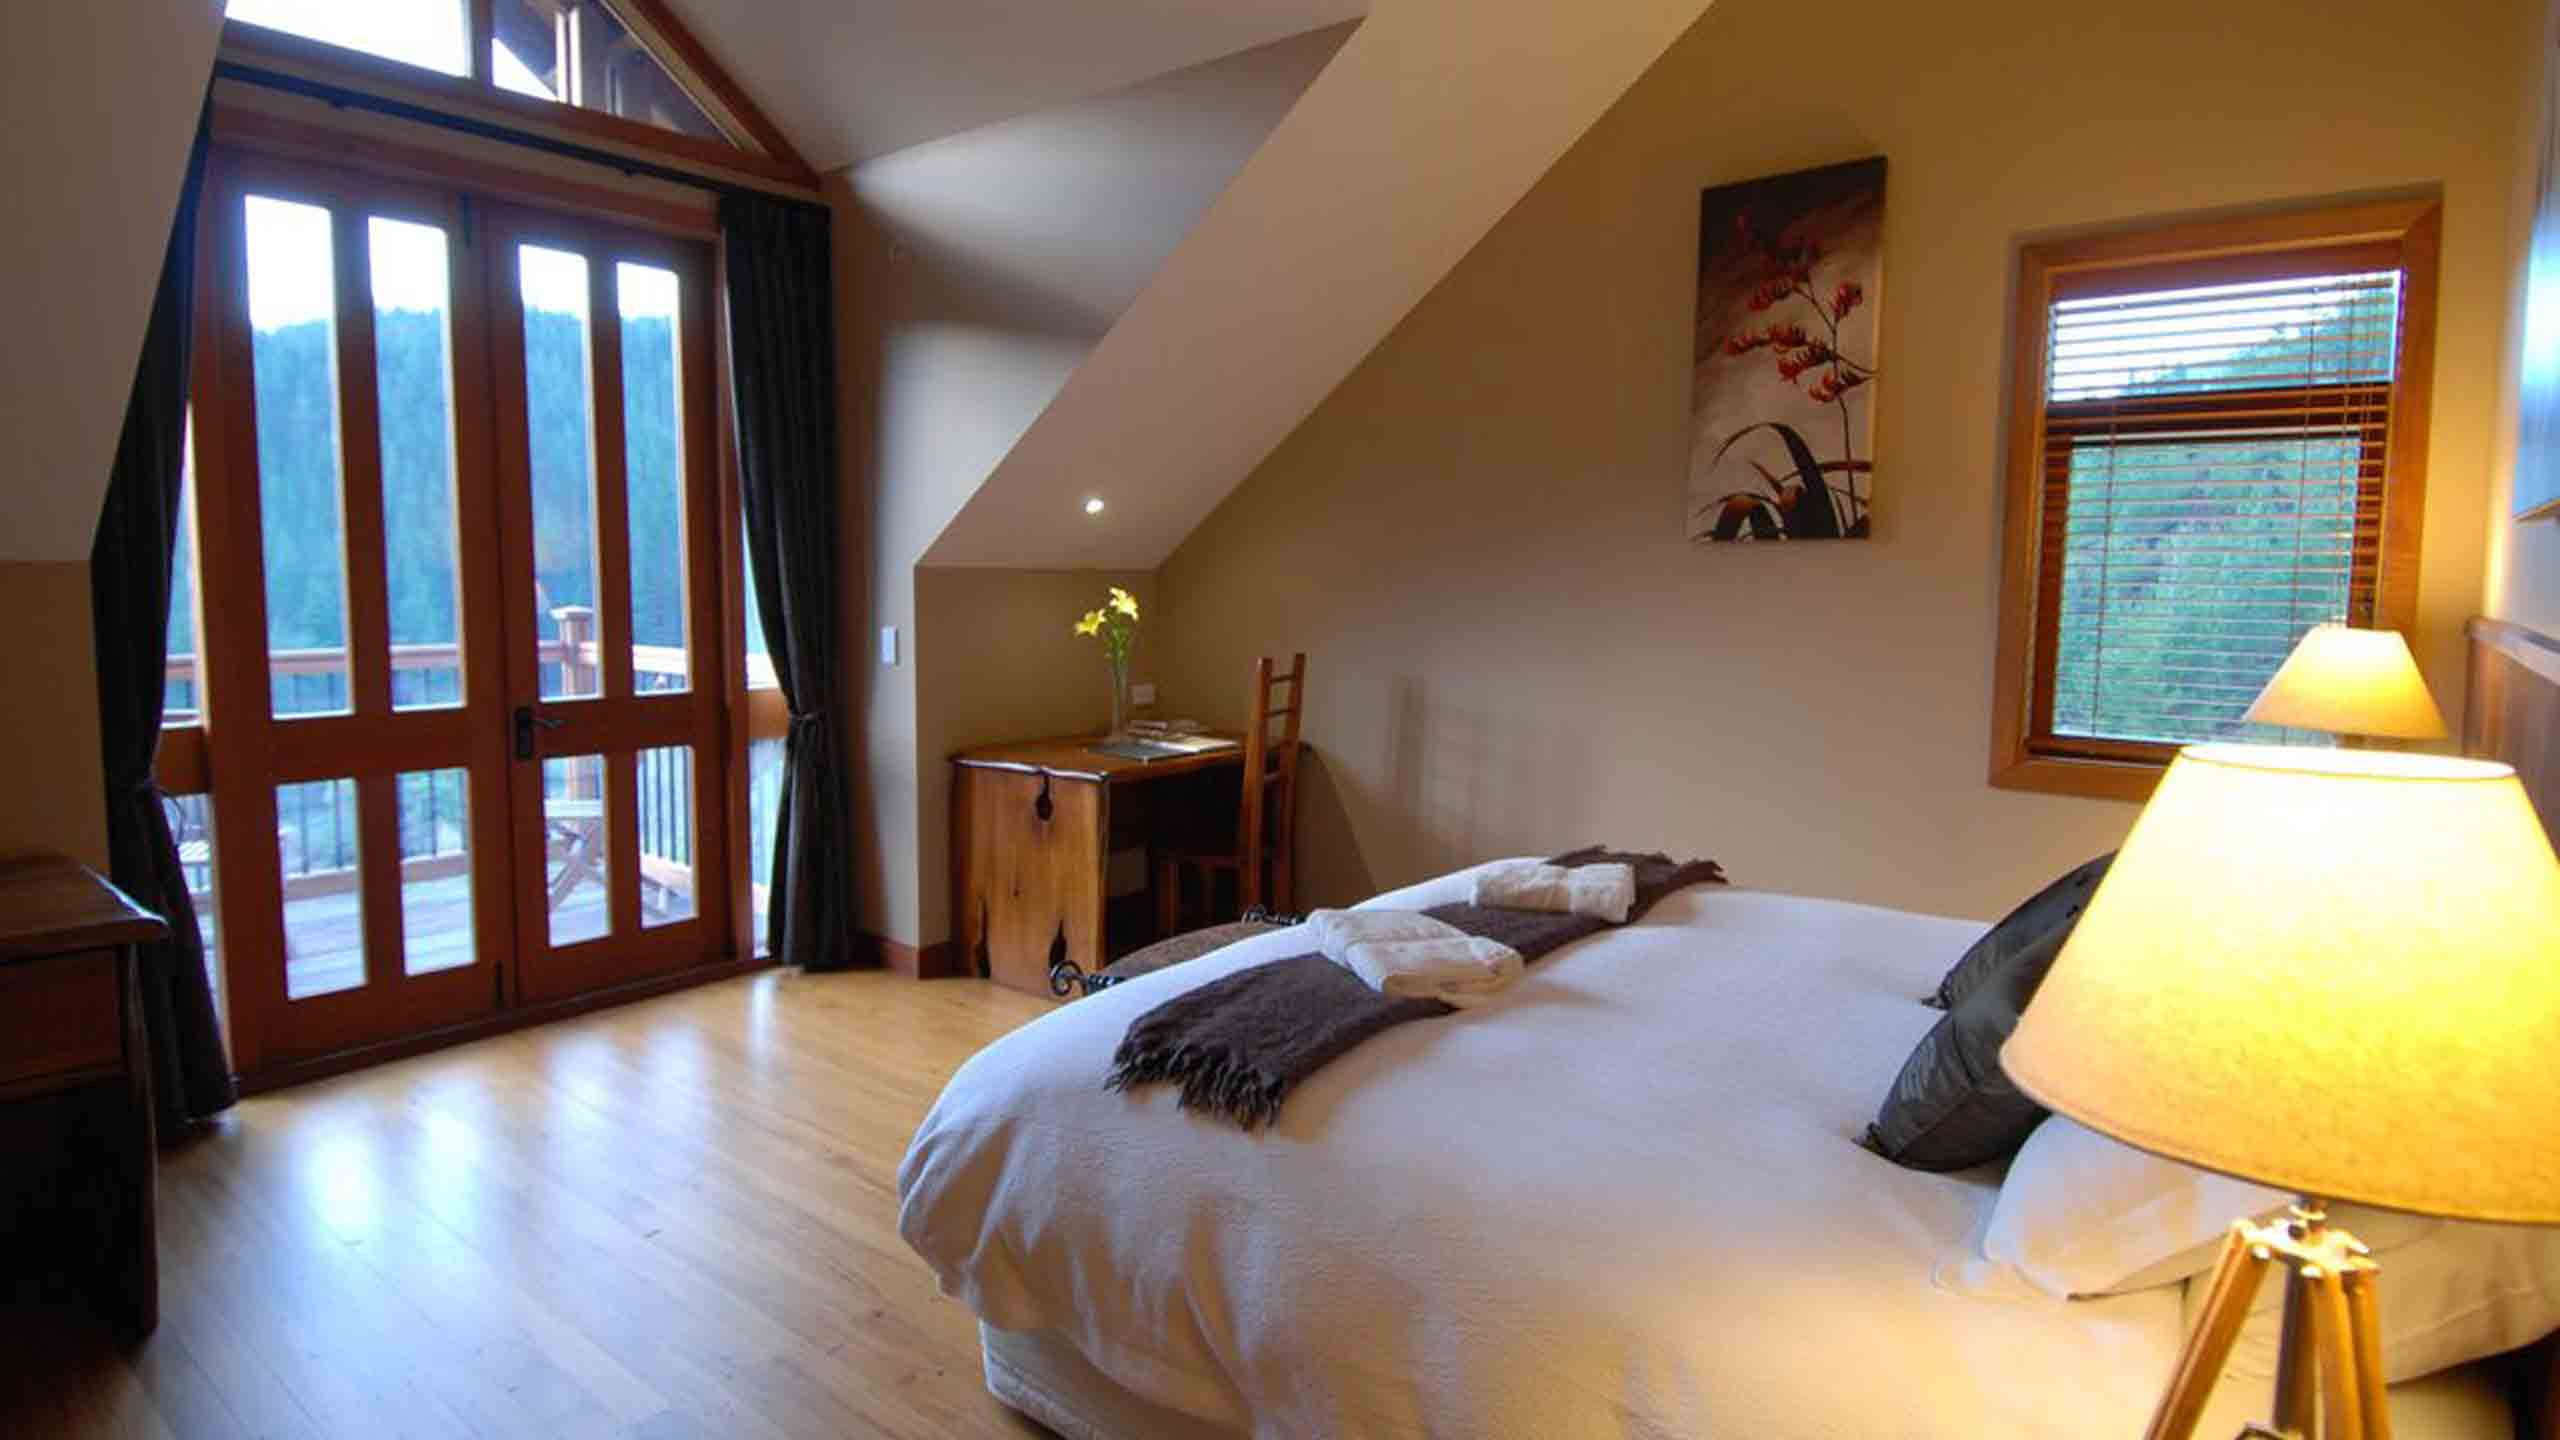 stonefly-luxury-lodge-nelson-new-zealand-bedroom-view-out